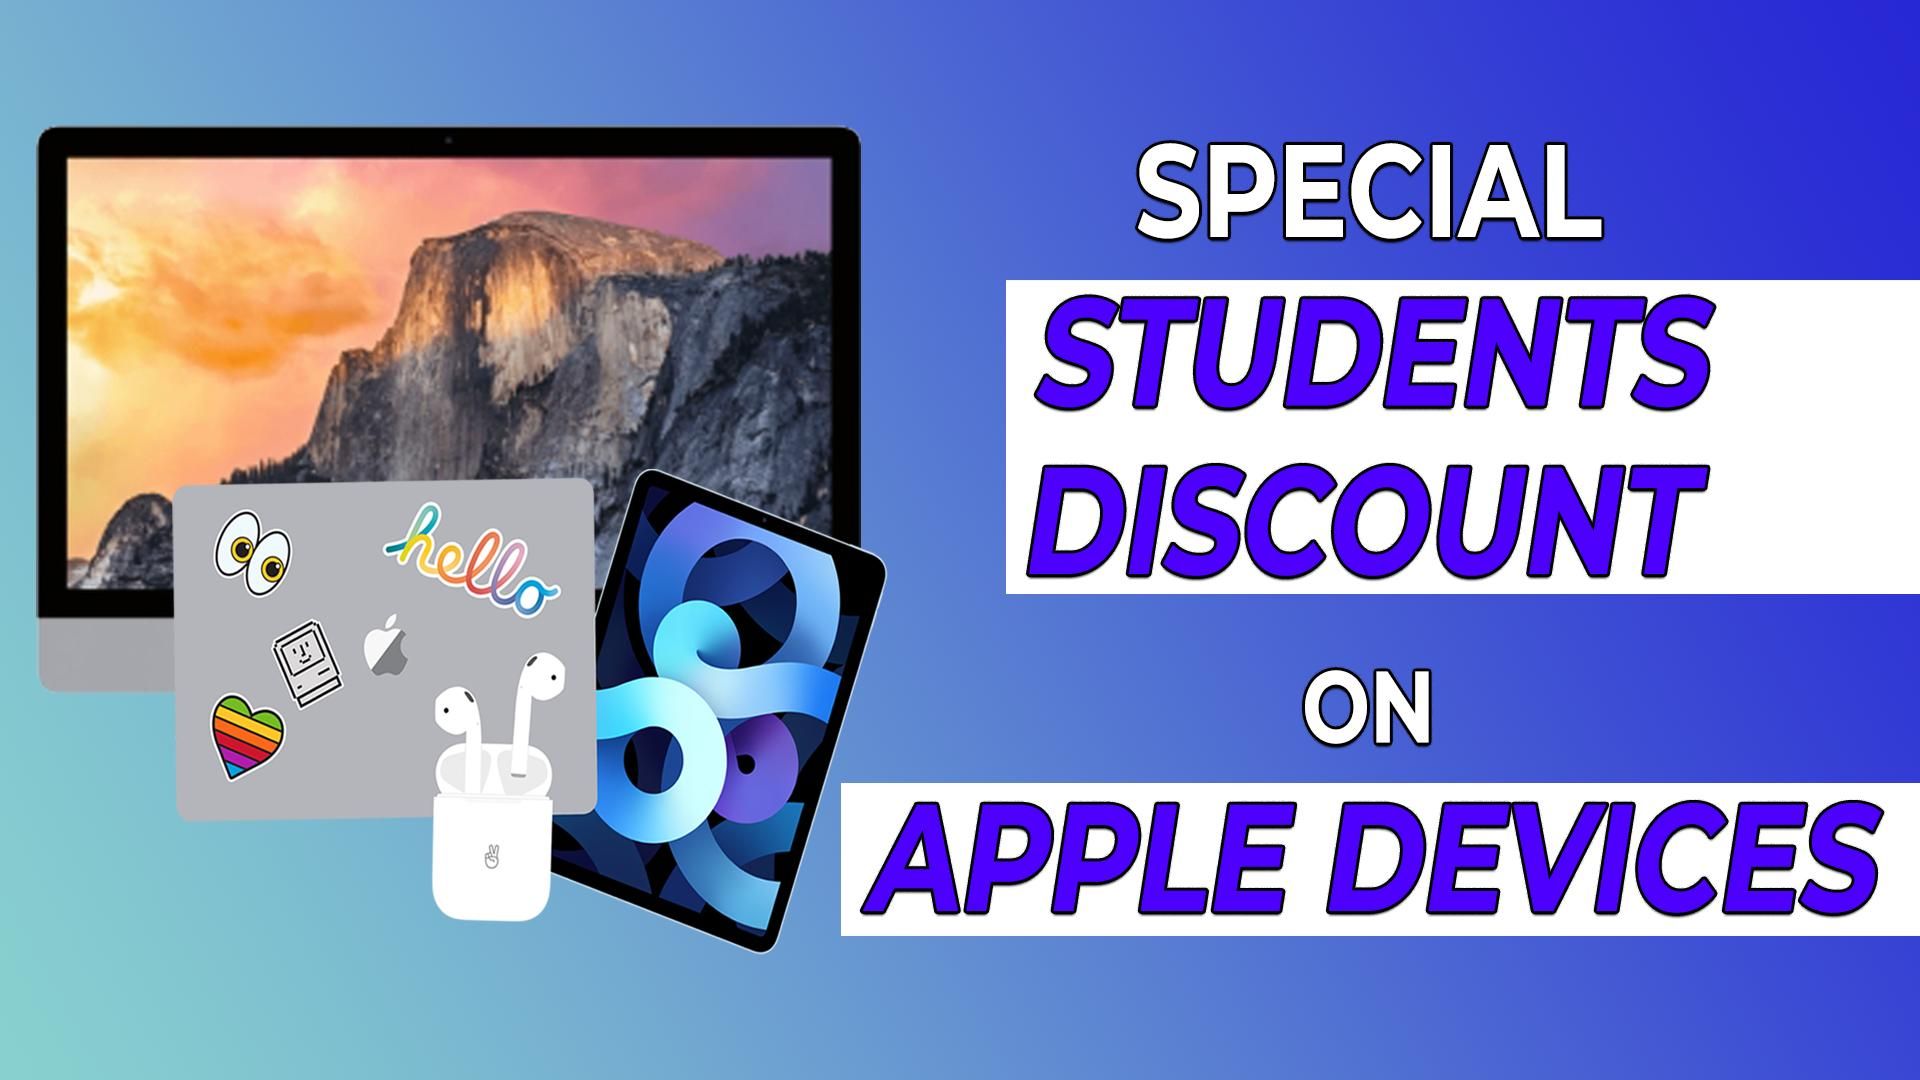 Apples Back To School Offer Comes Up With Special Student Discounts On